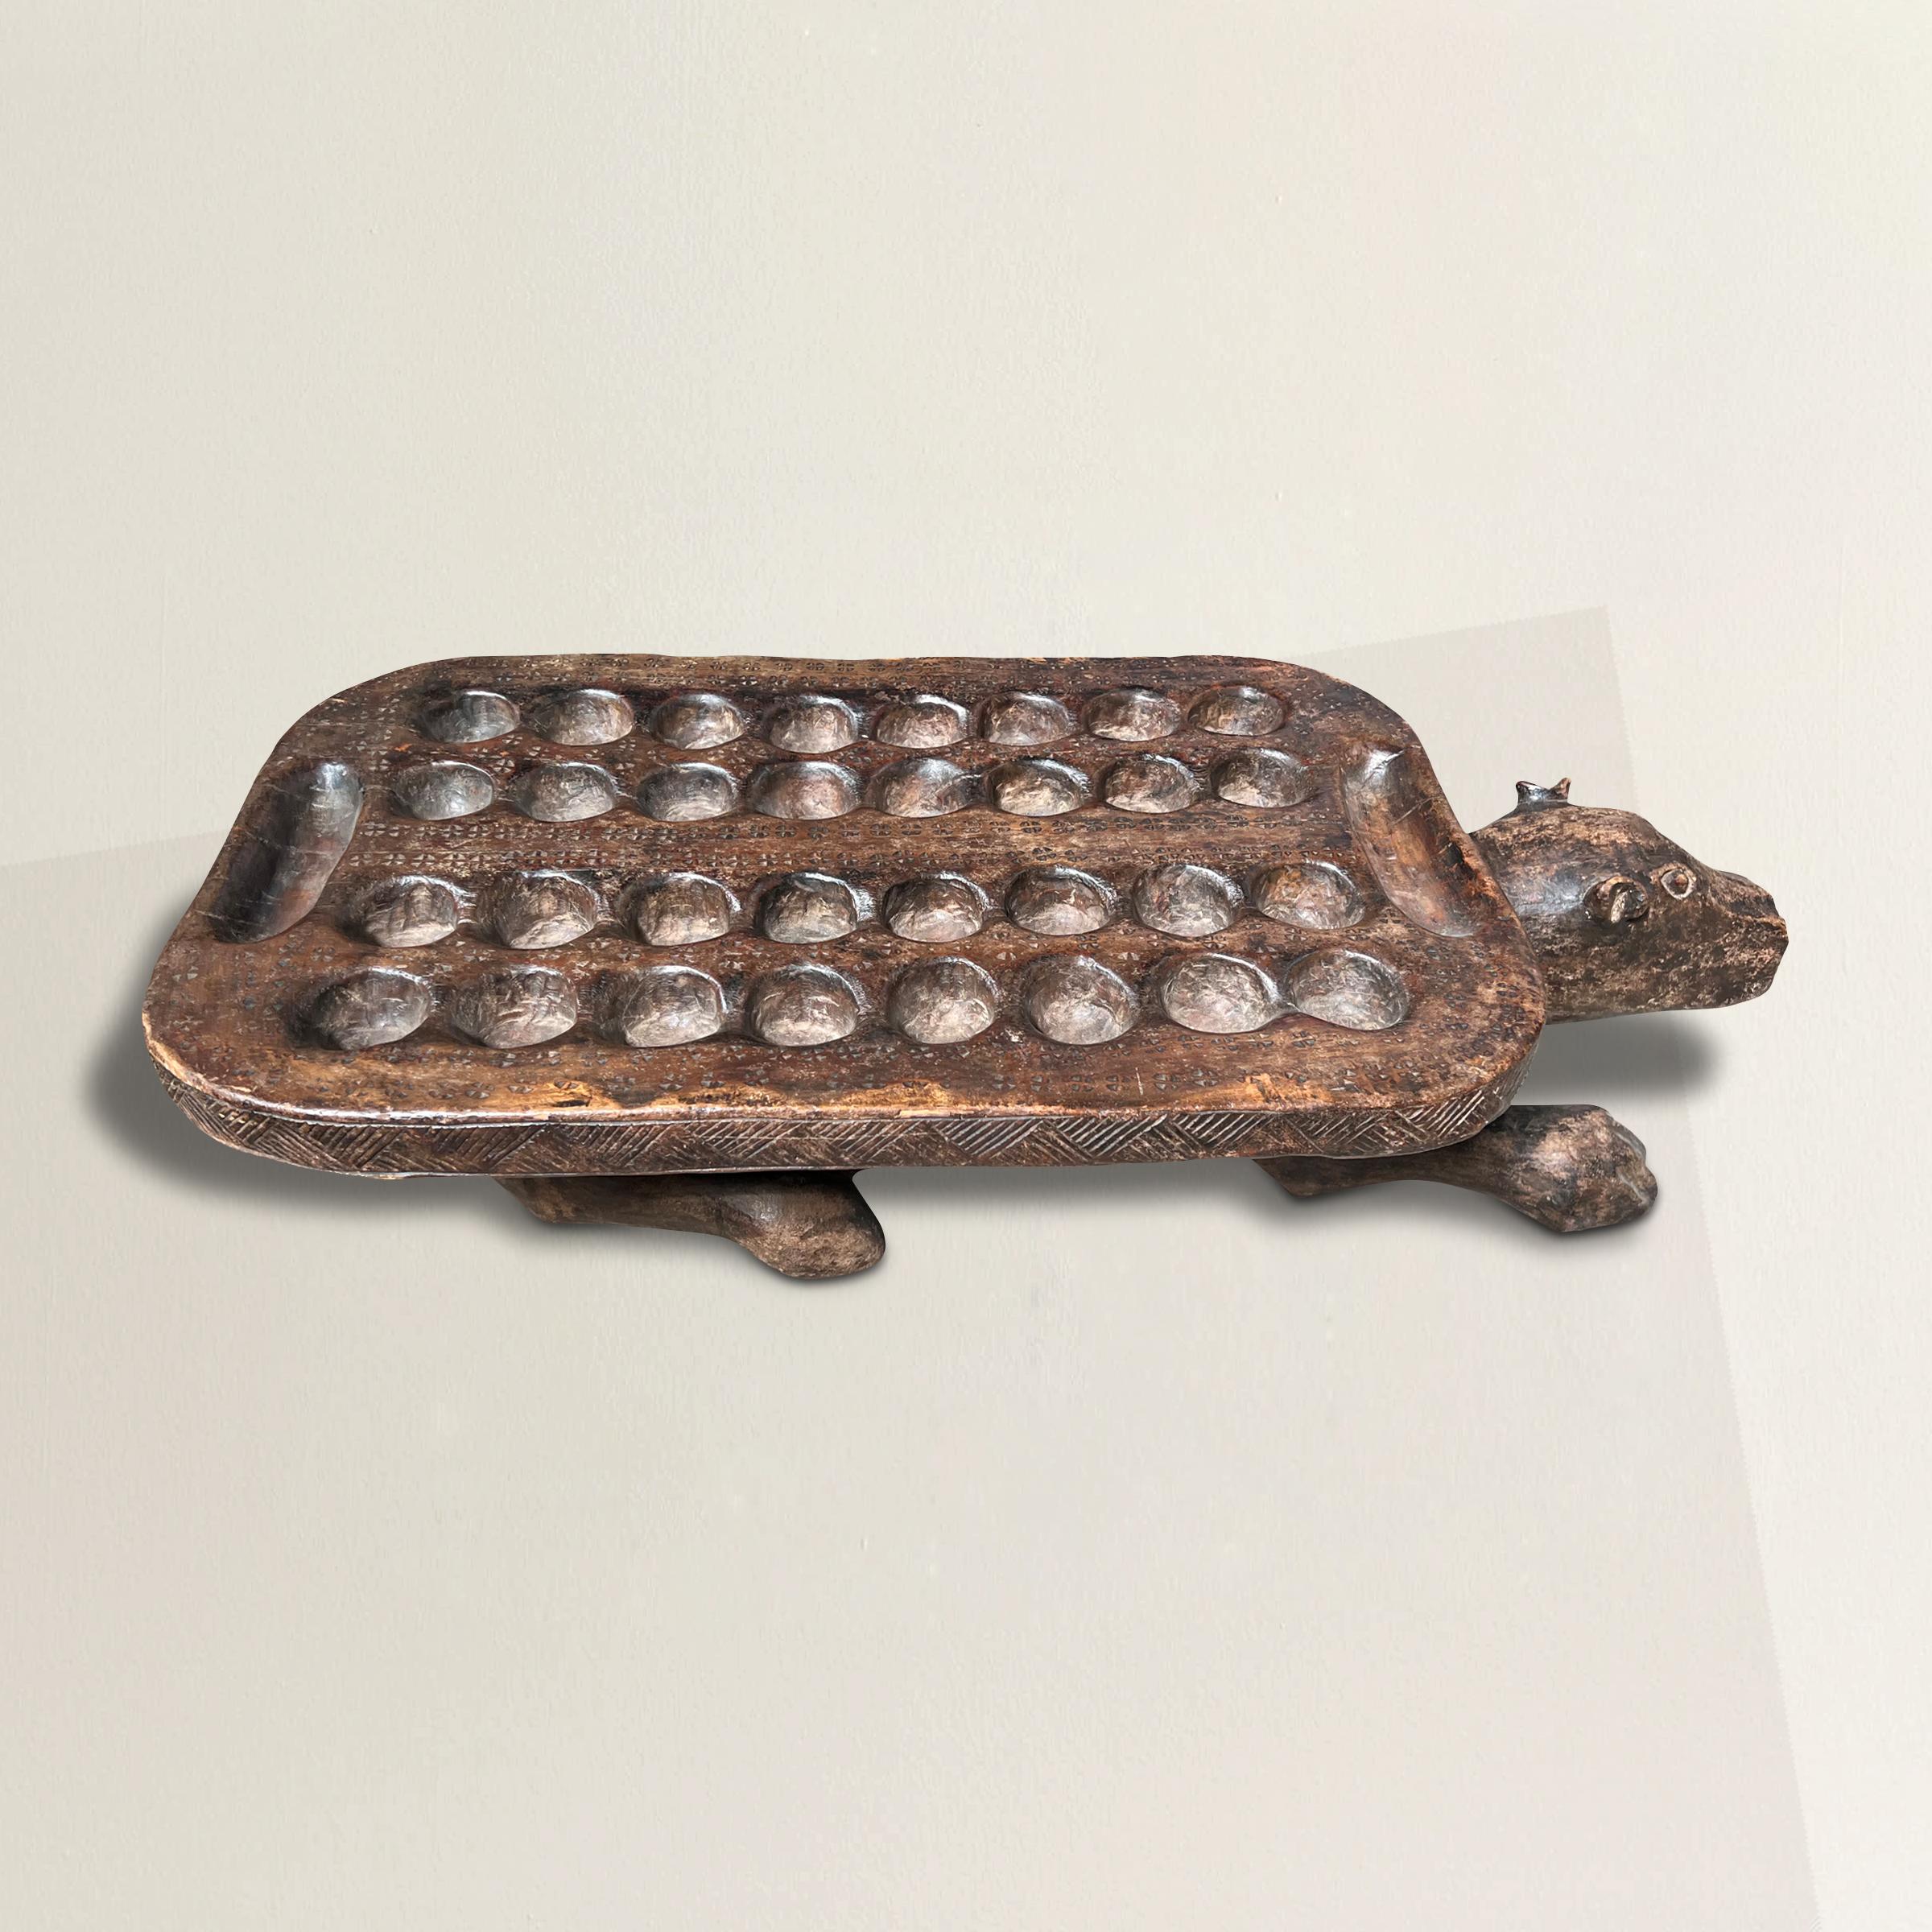 A whimsical and playful early 20th century leopard-form mancala game board carved with the board resting on the leopard's back and with a patina that only a hundred years of use could bestow.  A hole on the side of the leopard originally held the